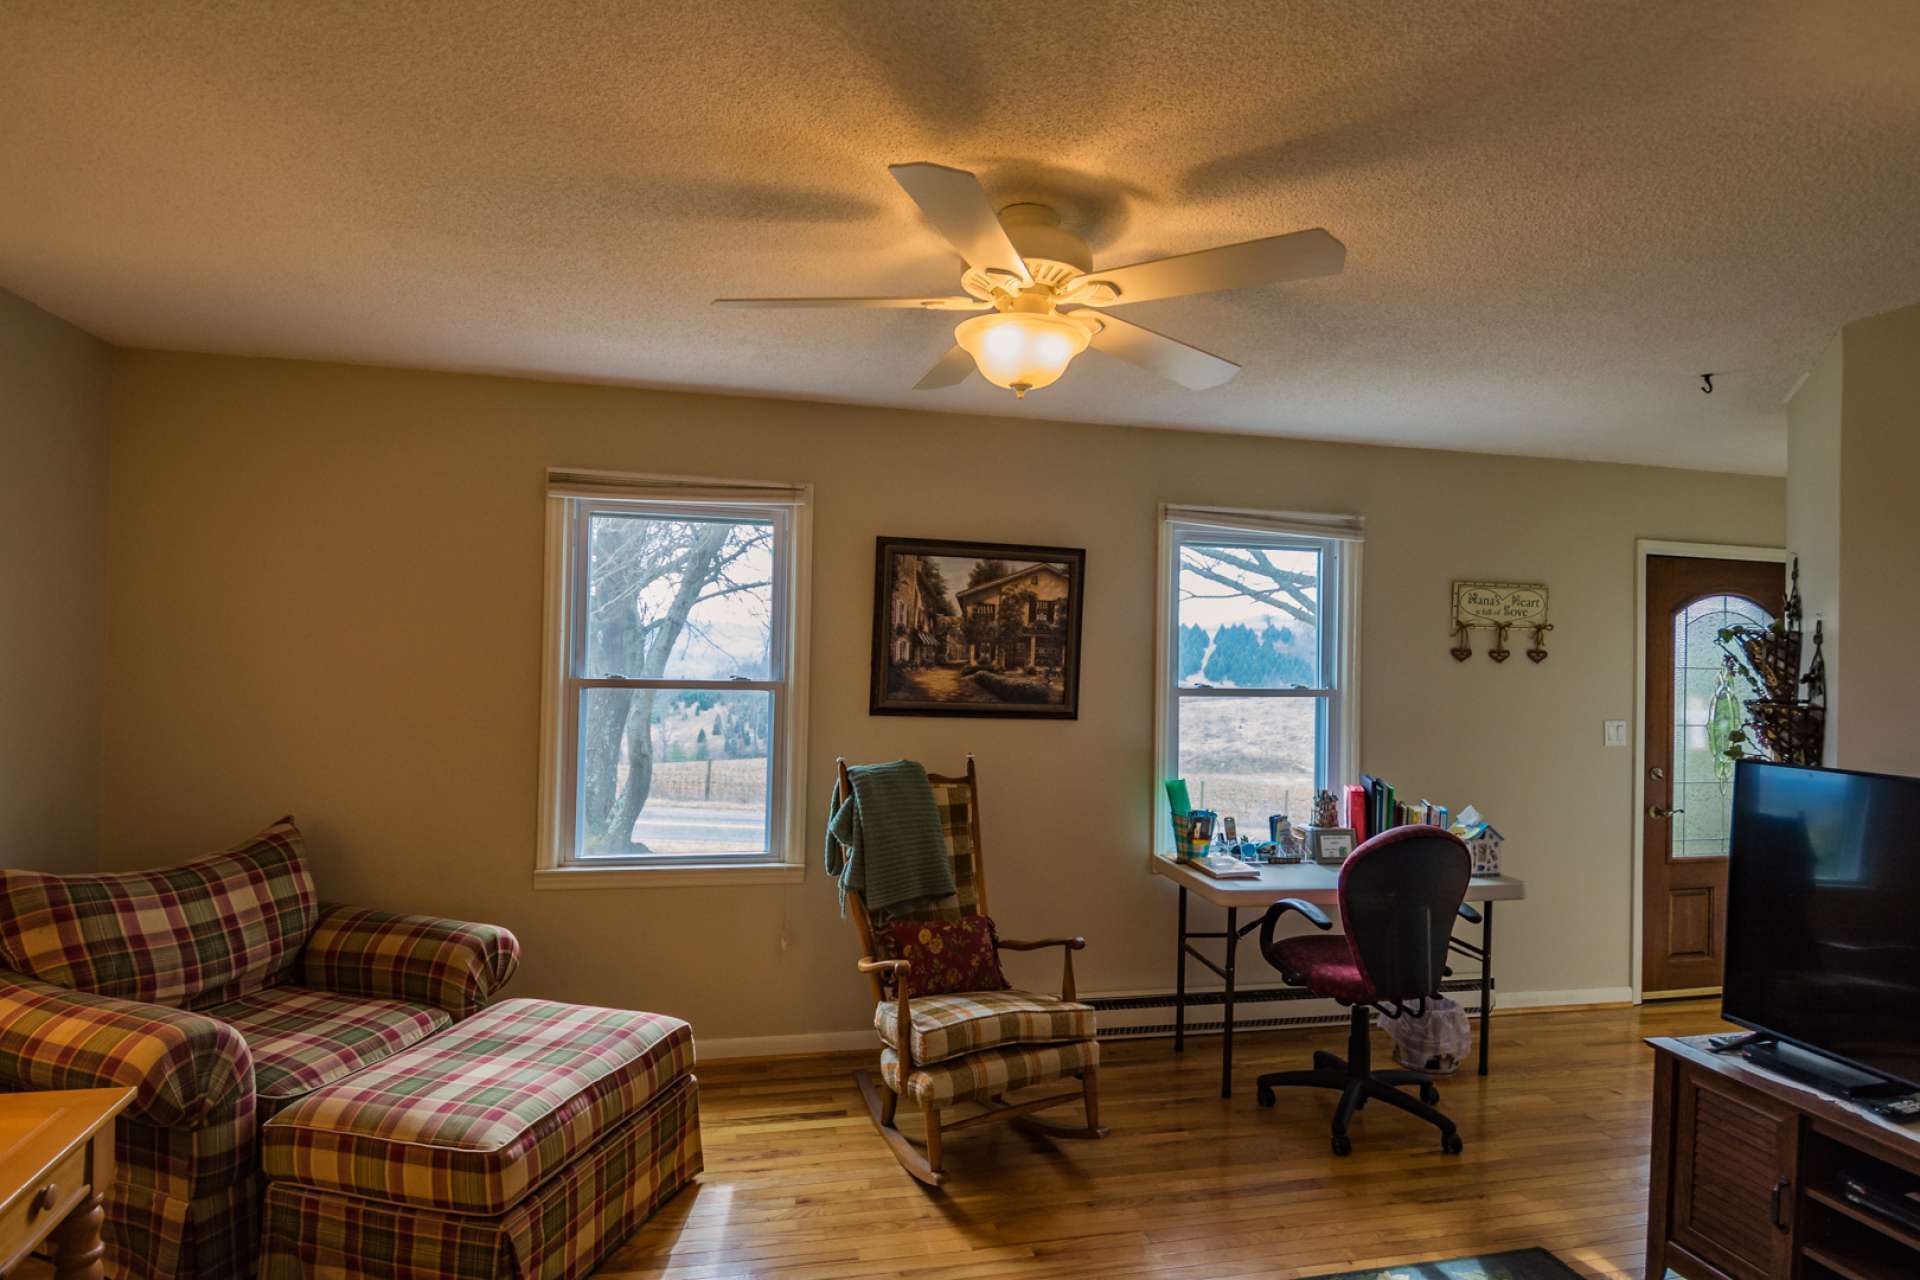 The spacious living room features beautiful oak flooring and lots of windows filling the room with natural light.